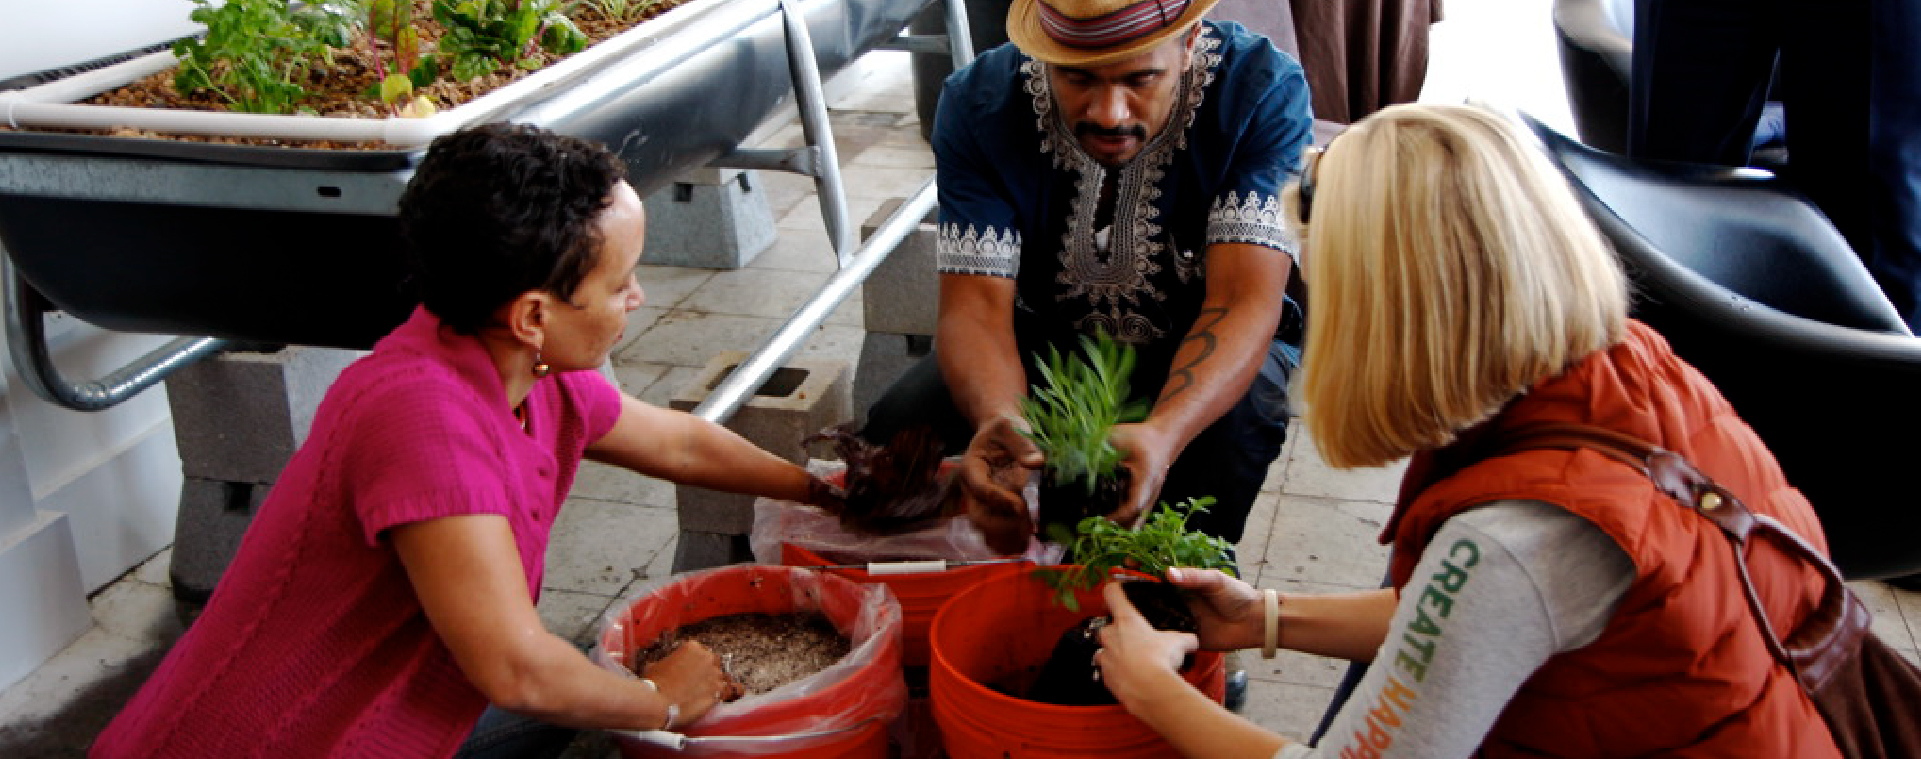 Three people kneeling and working together to pot plants with a raised metal trough of vegetation to their left.